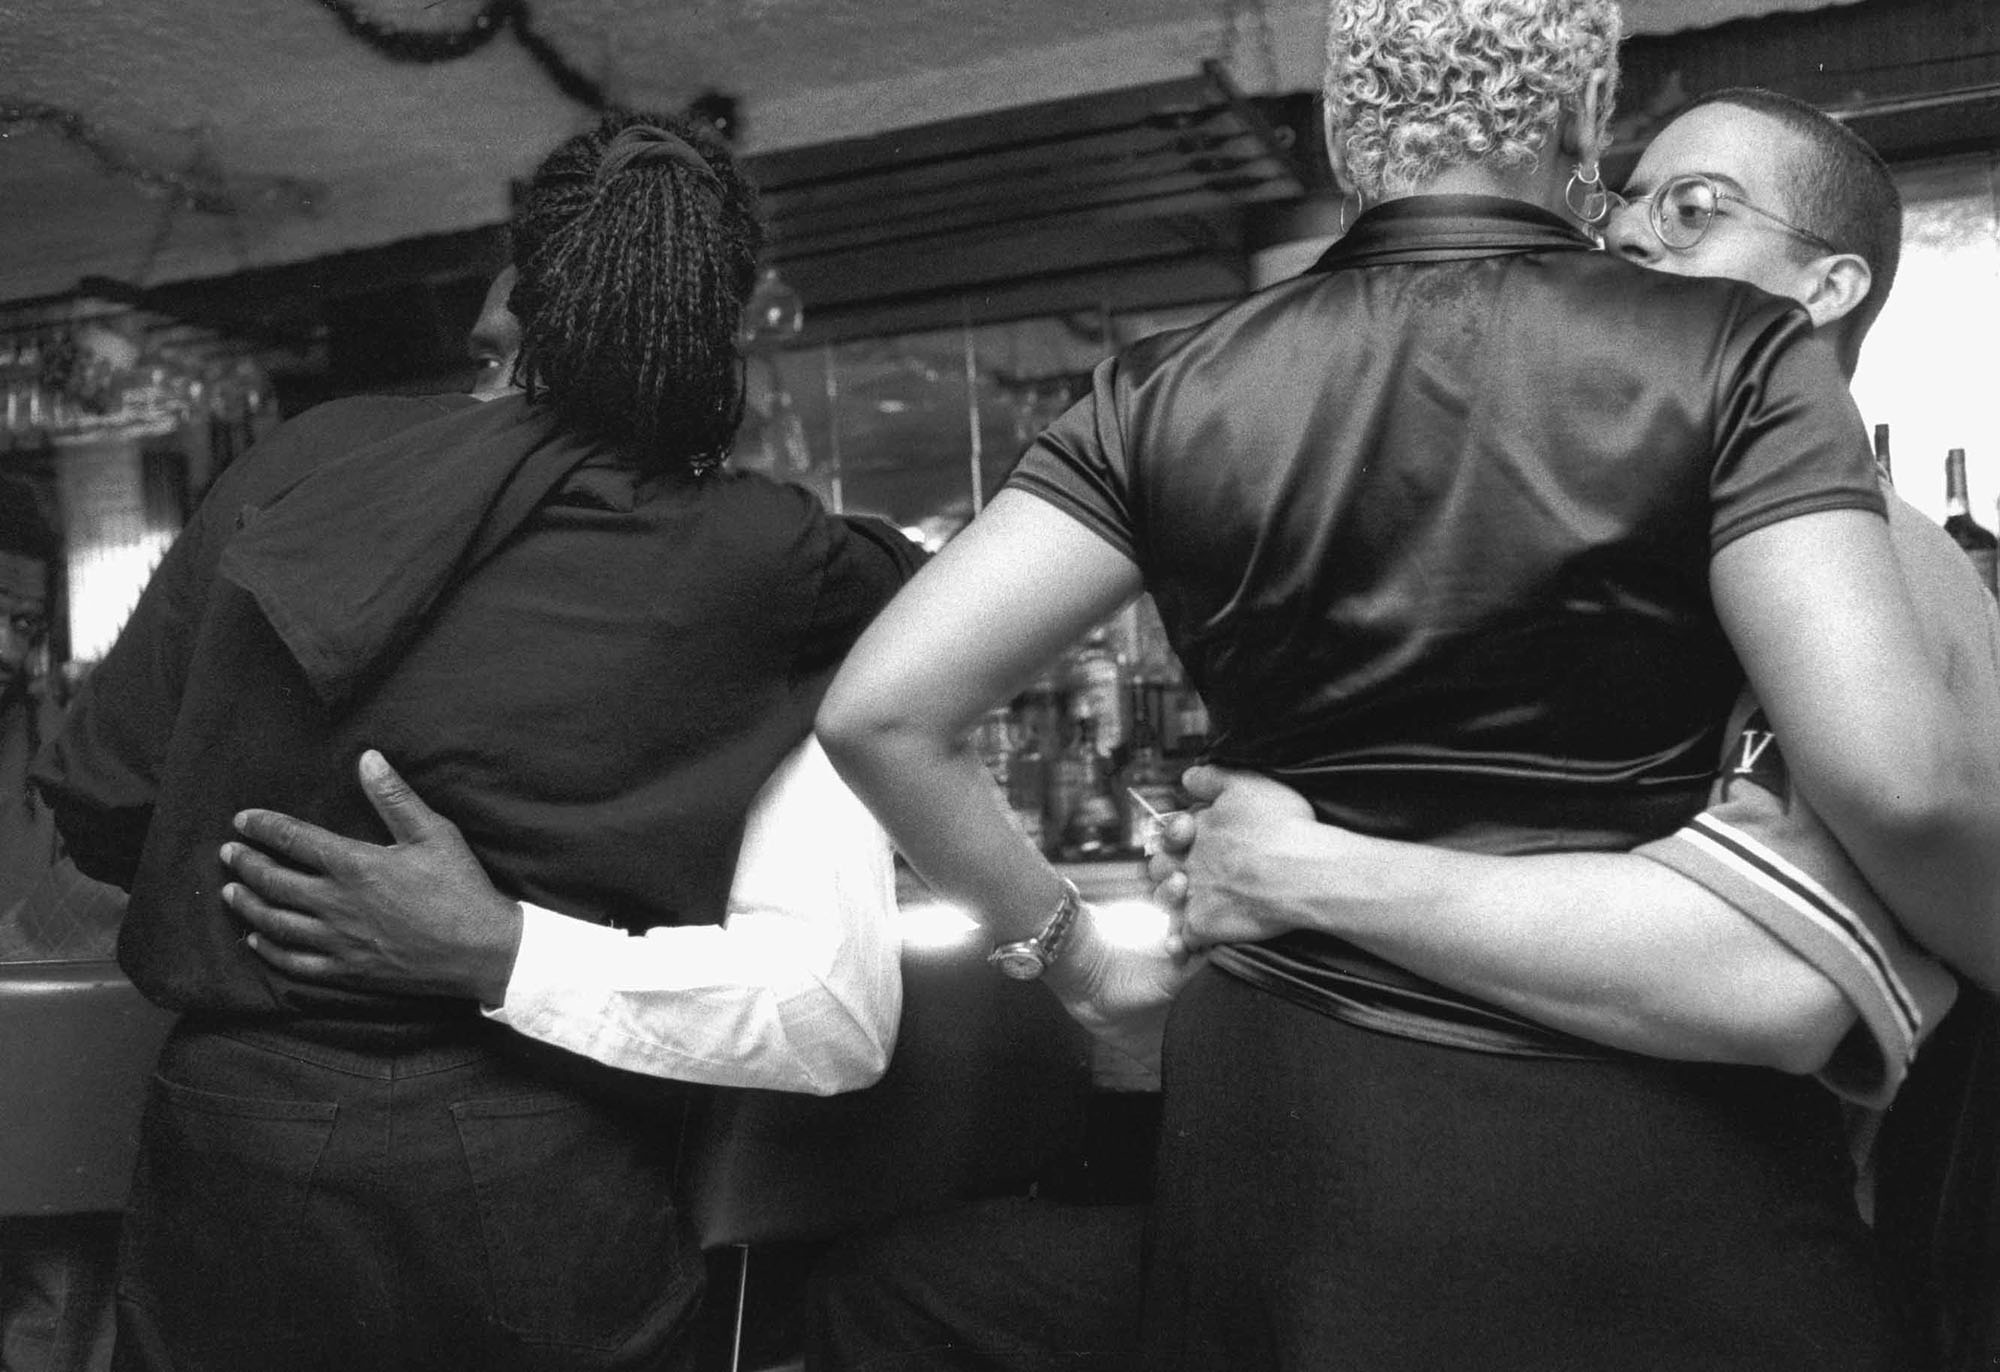 Gerald Cyrus, Two Couples, Arms Around, St. Nick's Pub, 1998. Gelatin silver print. Courtesy of the artist.